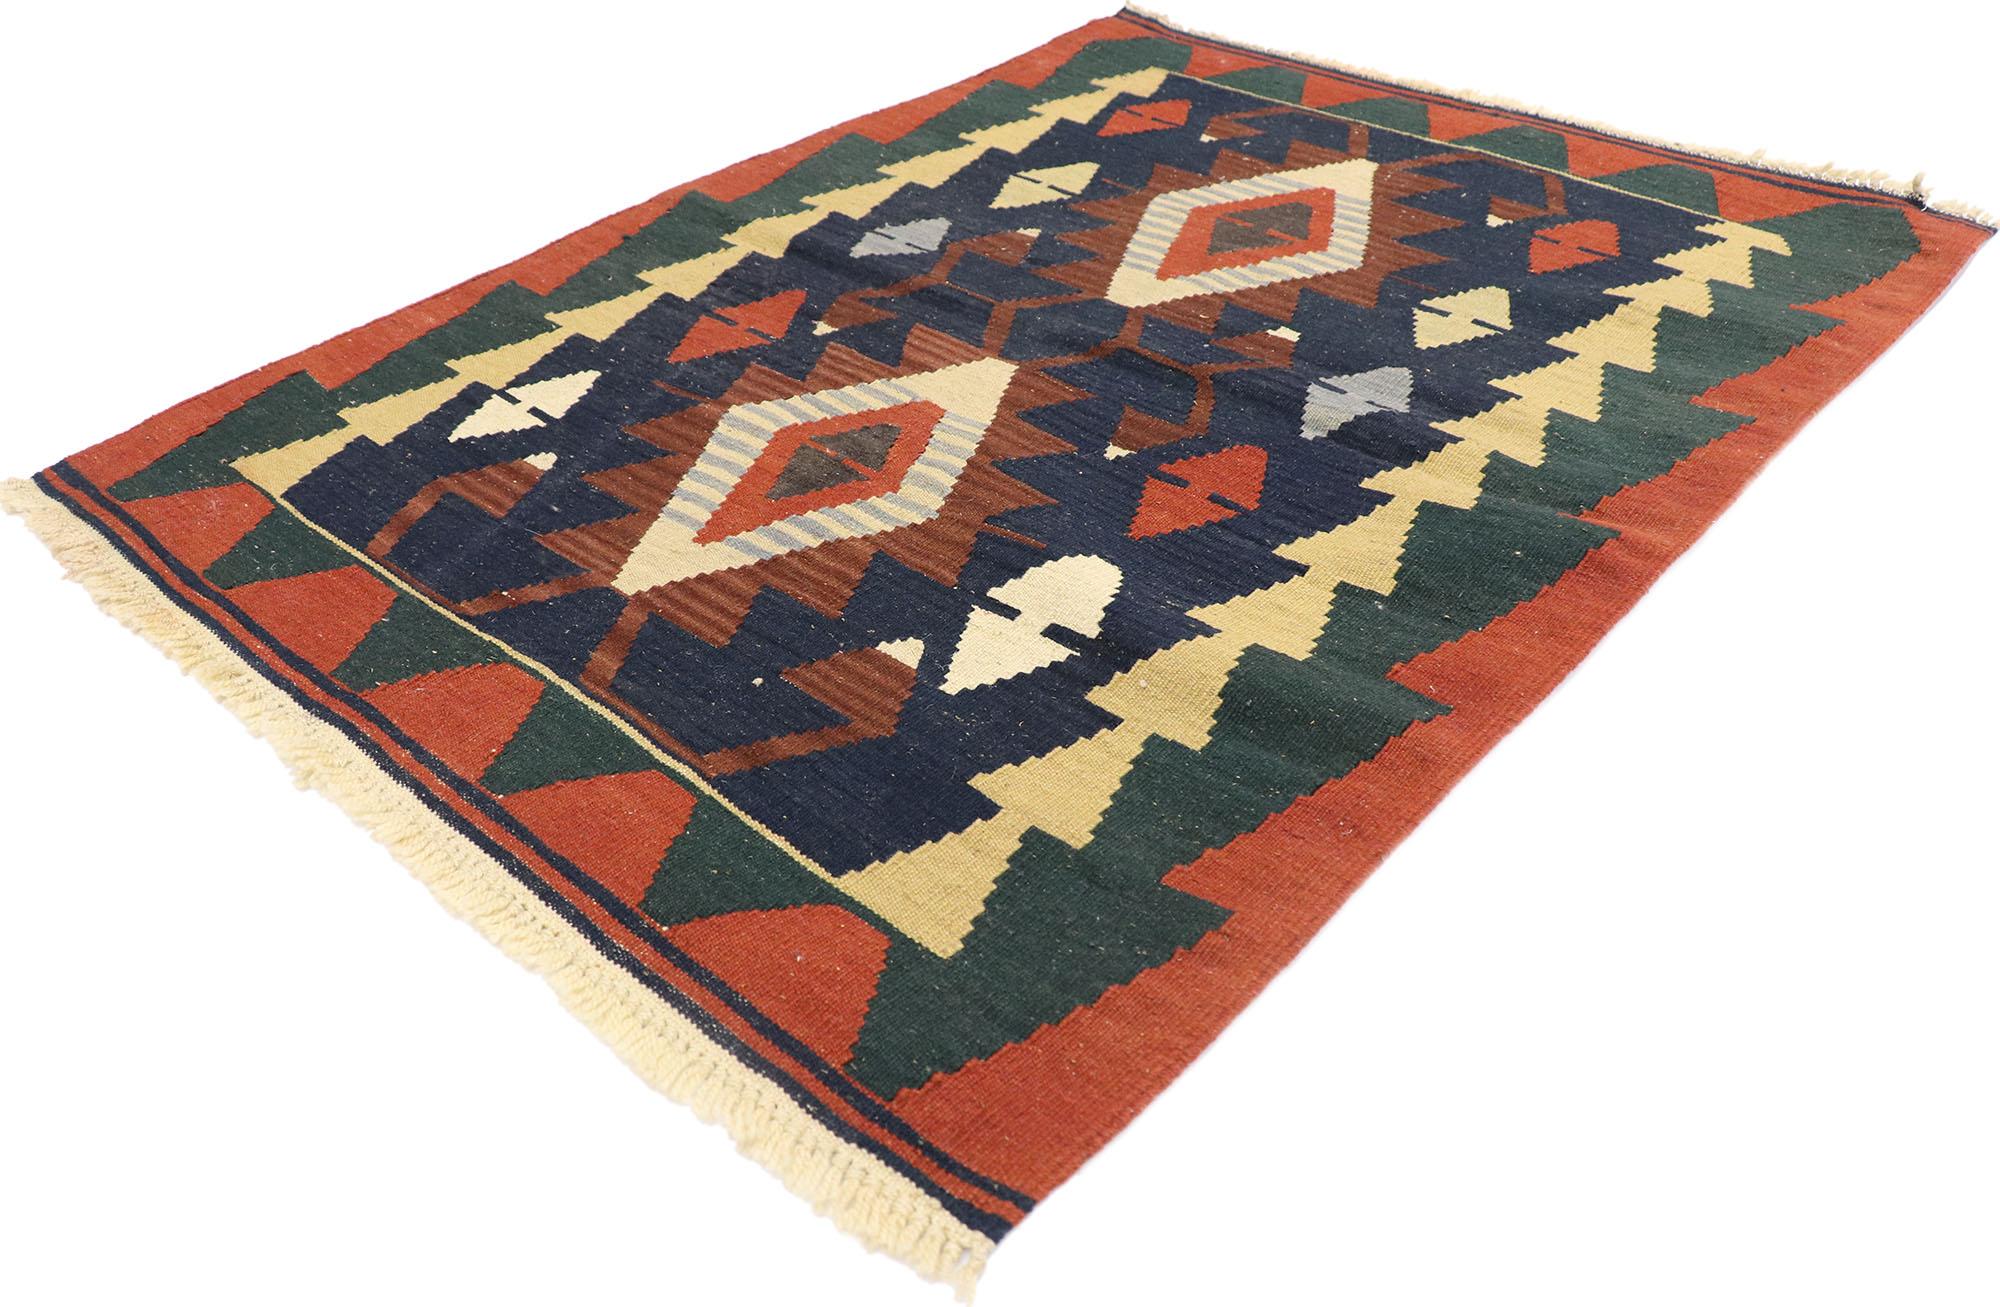 77975 Vintage Persian Shiraz Kilim rug with Tribal Style 03'00 x 04'01. Full of tiny details and a bold expressive design combined with warm colors and tribal style, this hand-woven wool vintage Persian Shiraz kilim rug is a captivating vision of